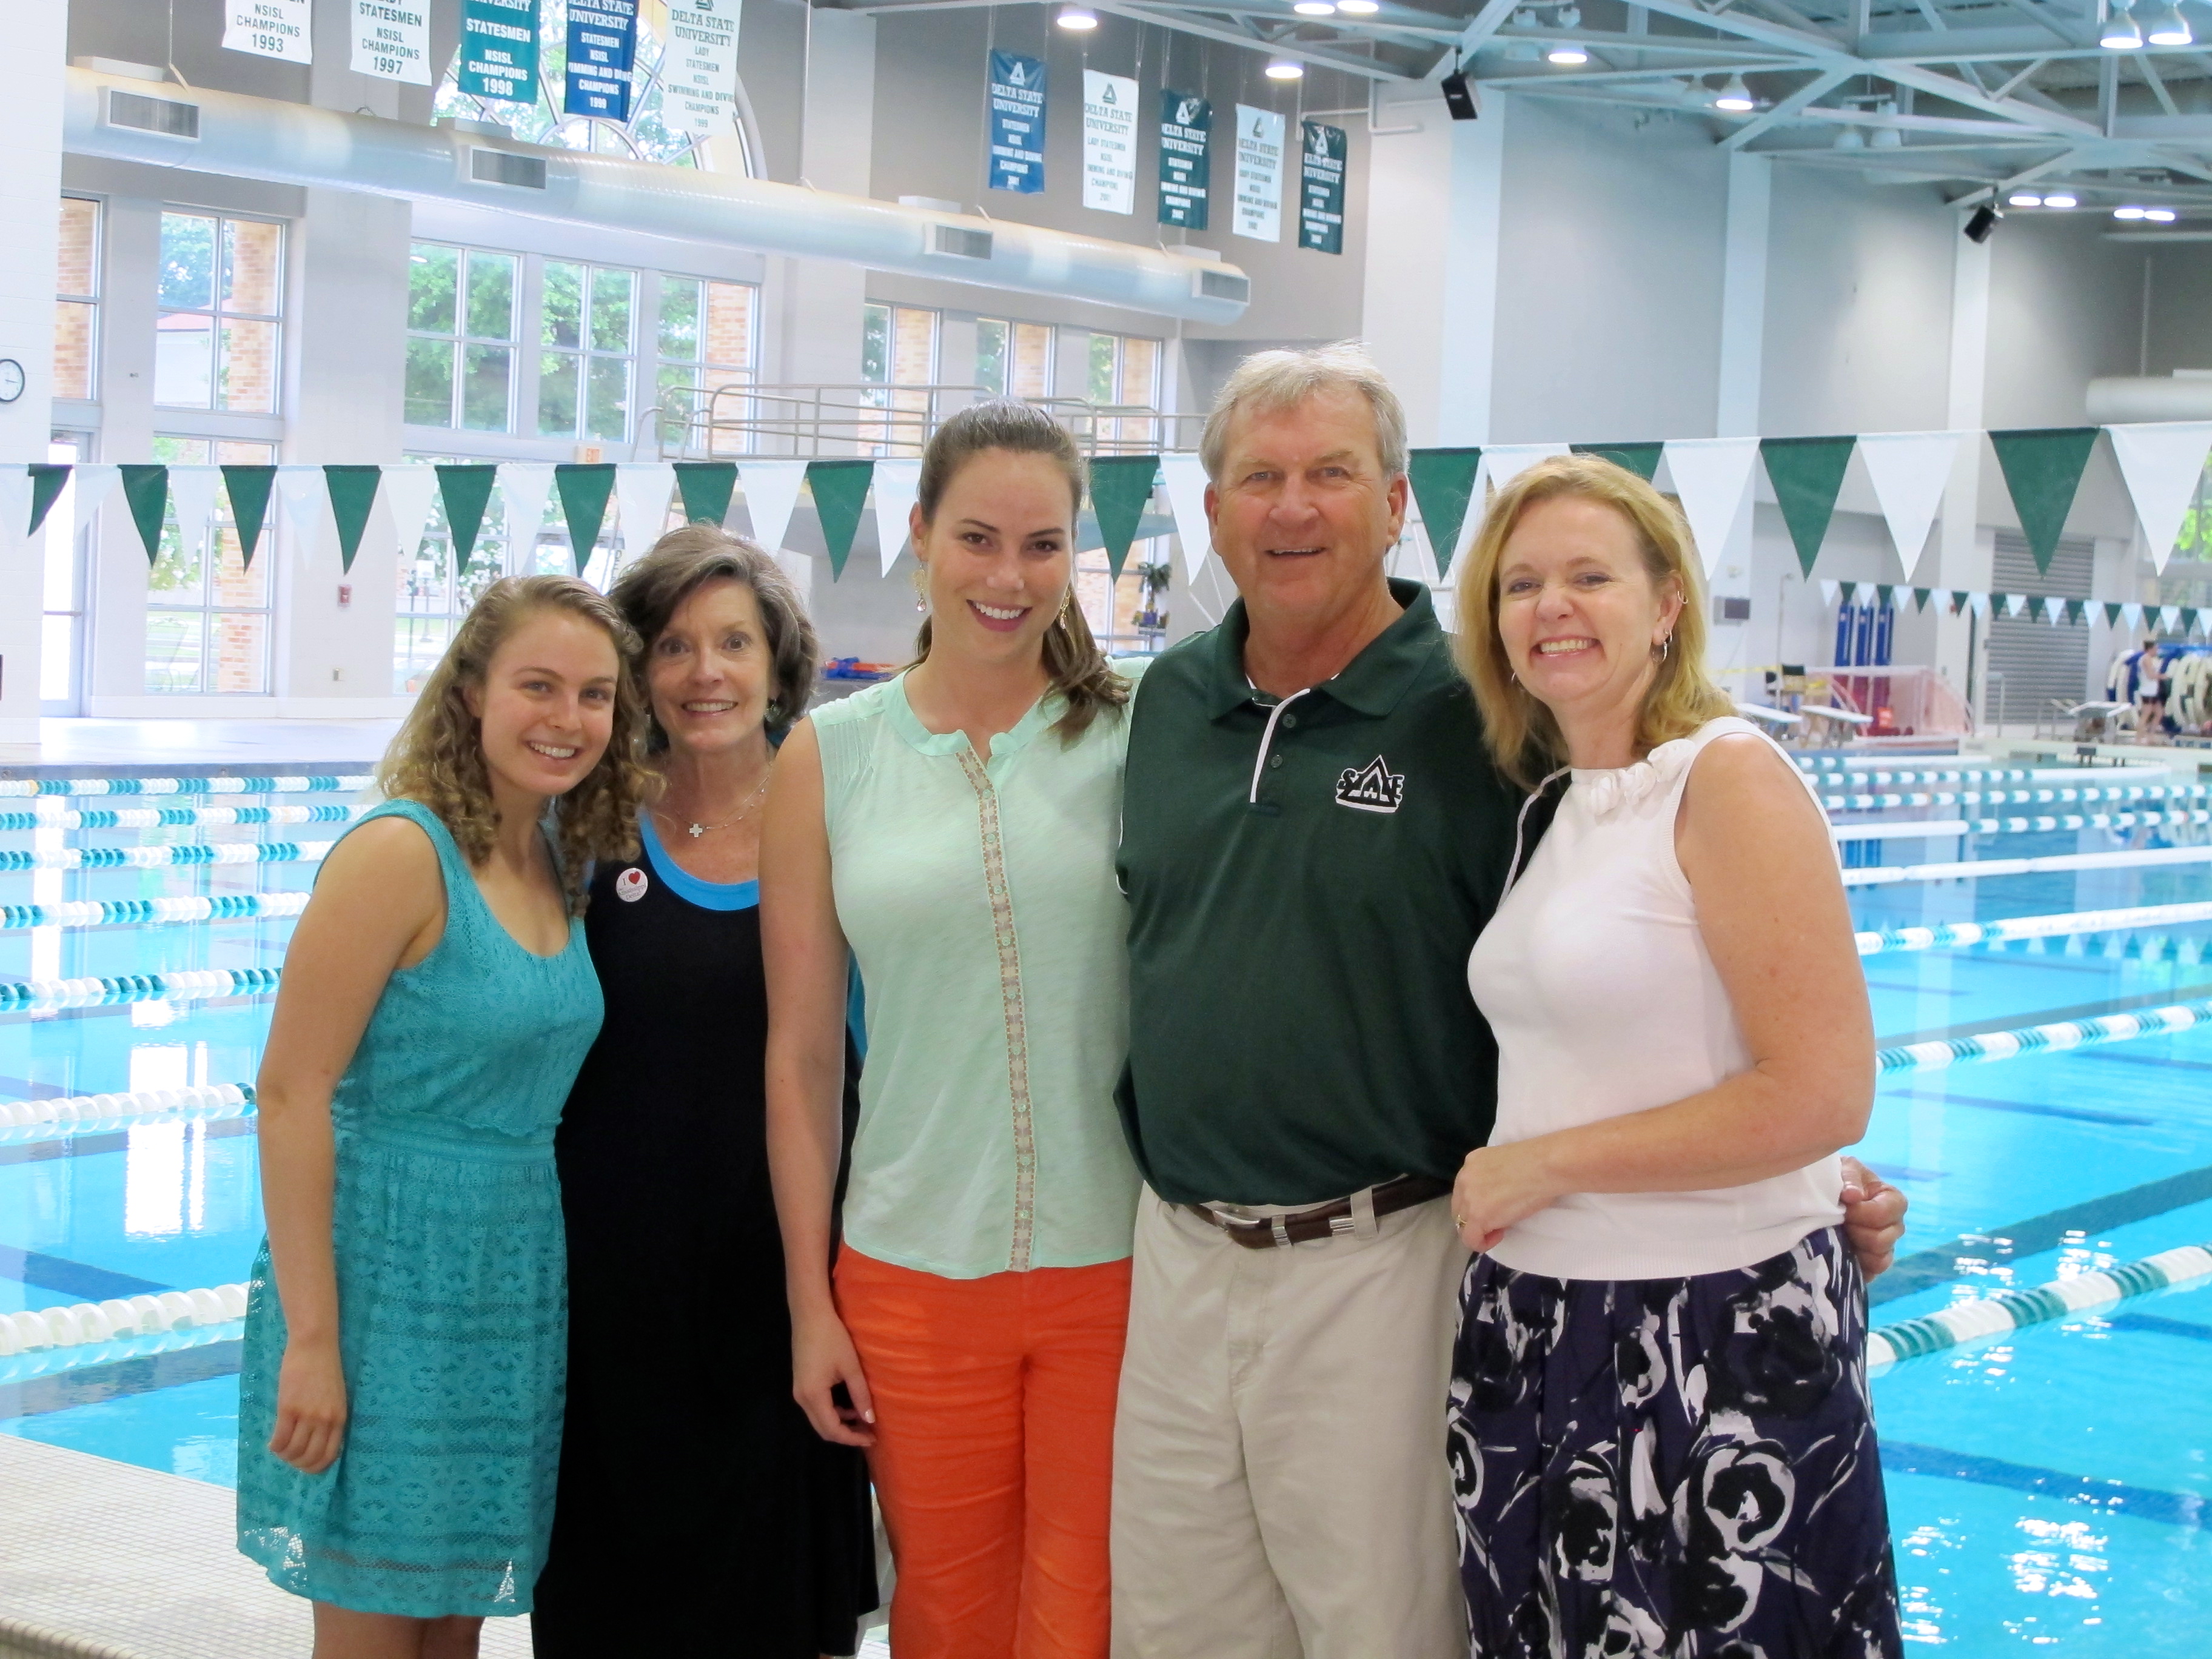 Caption:  Robertson Scholar and 2013 Delta Center intern Rachel Anderson, the Delta Center’s Lee Aylward, Elaine Penrose, Delta State Athletic Director Ronnie Mayers, and Vicki Stocking at the Delta State Aquatics Center.  Elaine Penrose and Vicki Stocking coordinate the Robertson Scholars’ summer programs. 